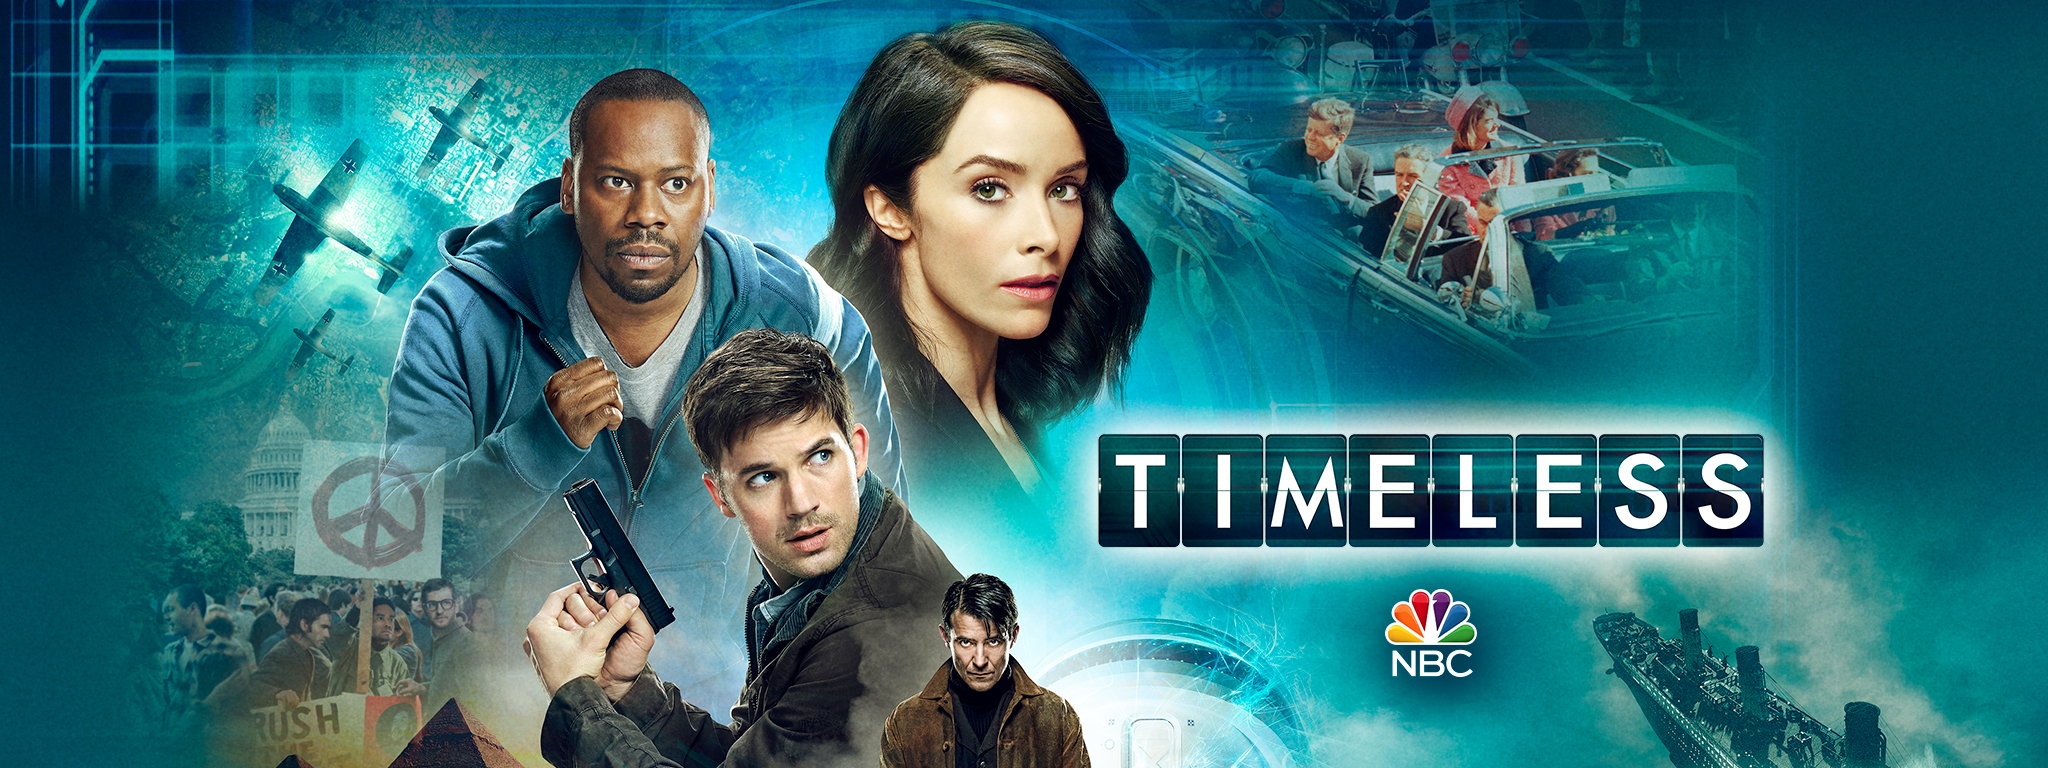 2048x768 > Timeless Wallpapers